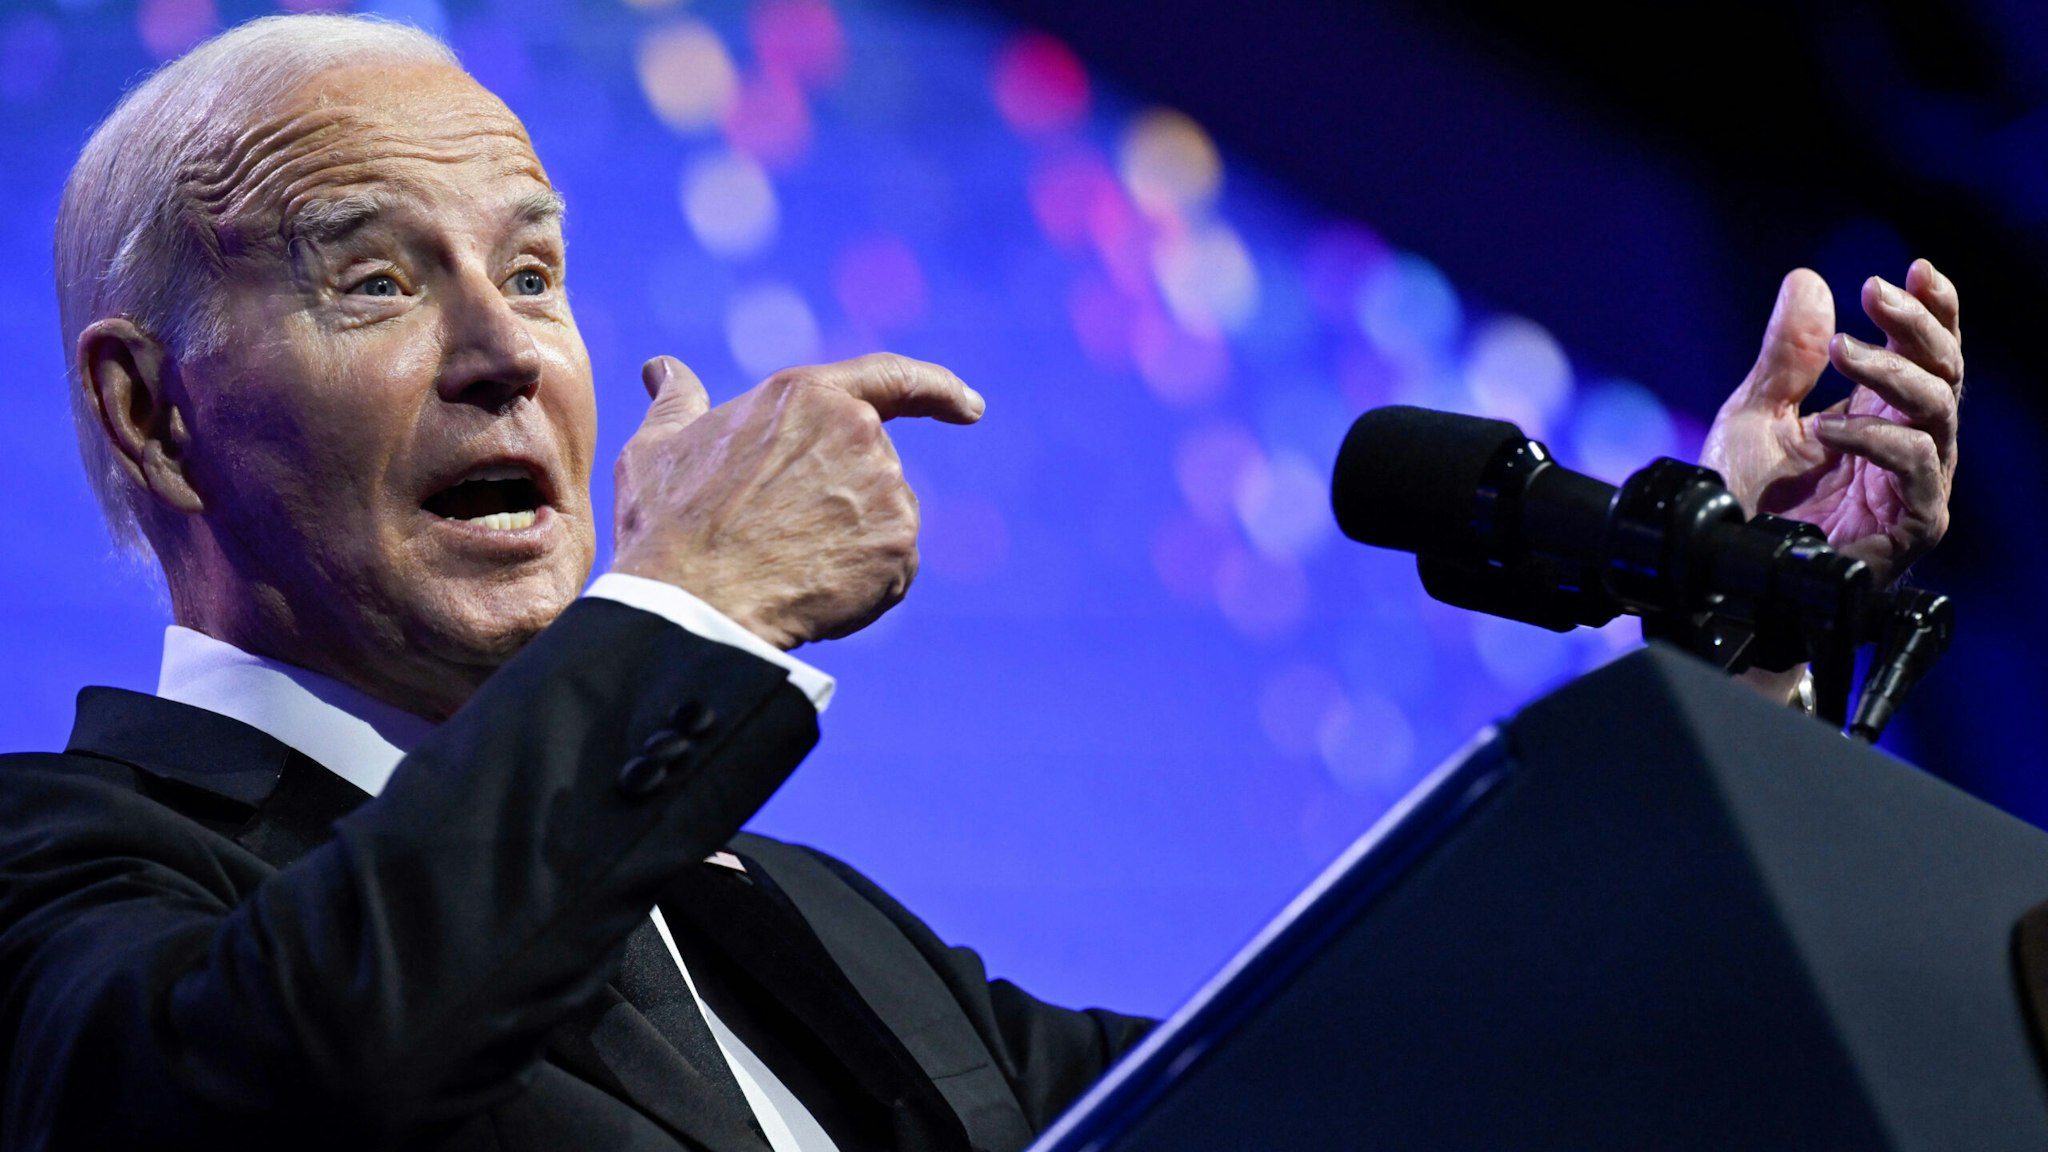 US President Joe Biden mimics holding a firearm while speaking about assault weapon ban during the Human Rights Campaign National Dinner at the Washington Convention Center in Washington, DC, on October 14, 2023.